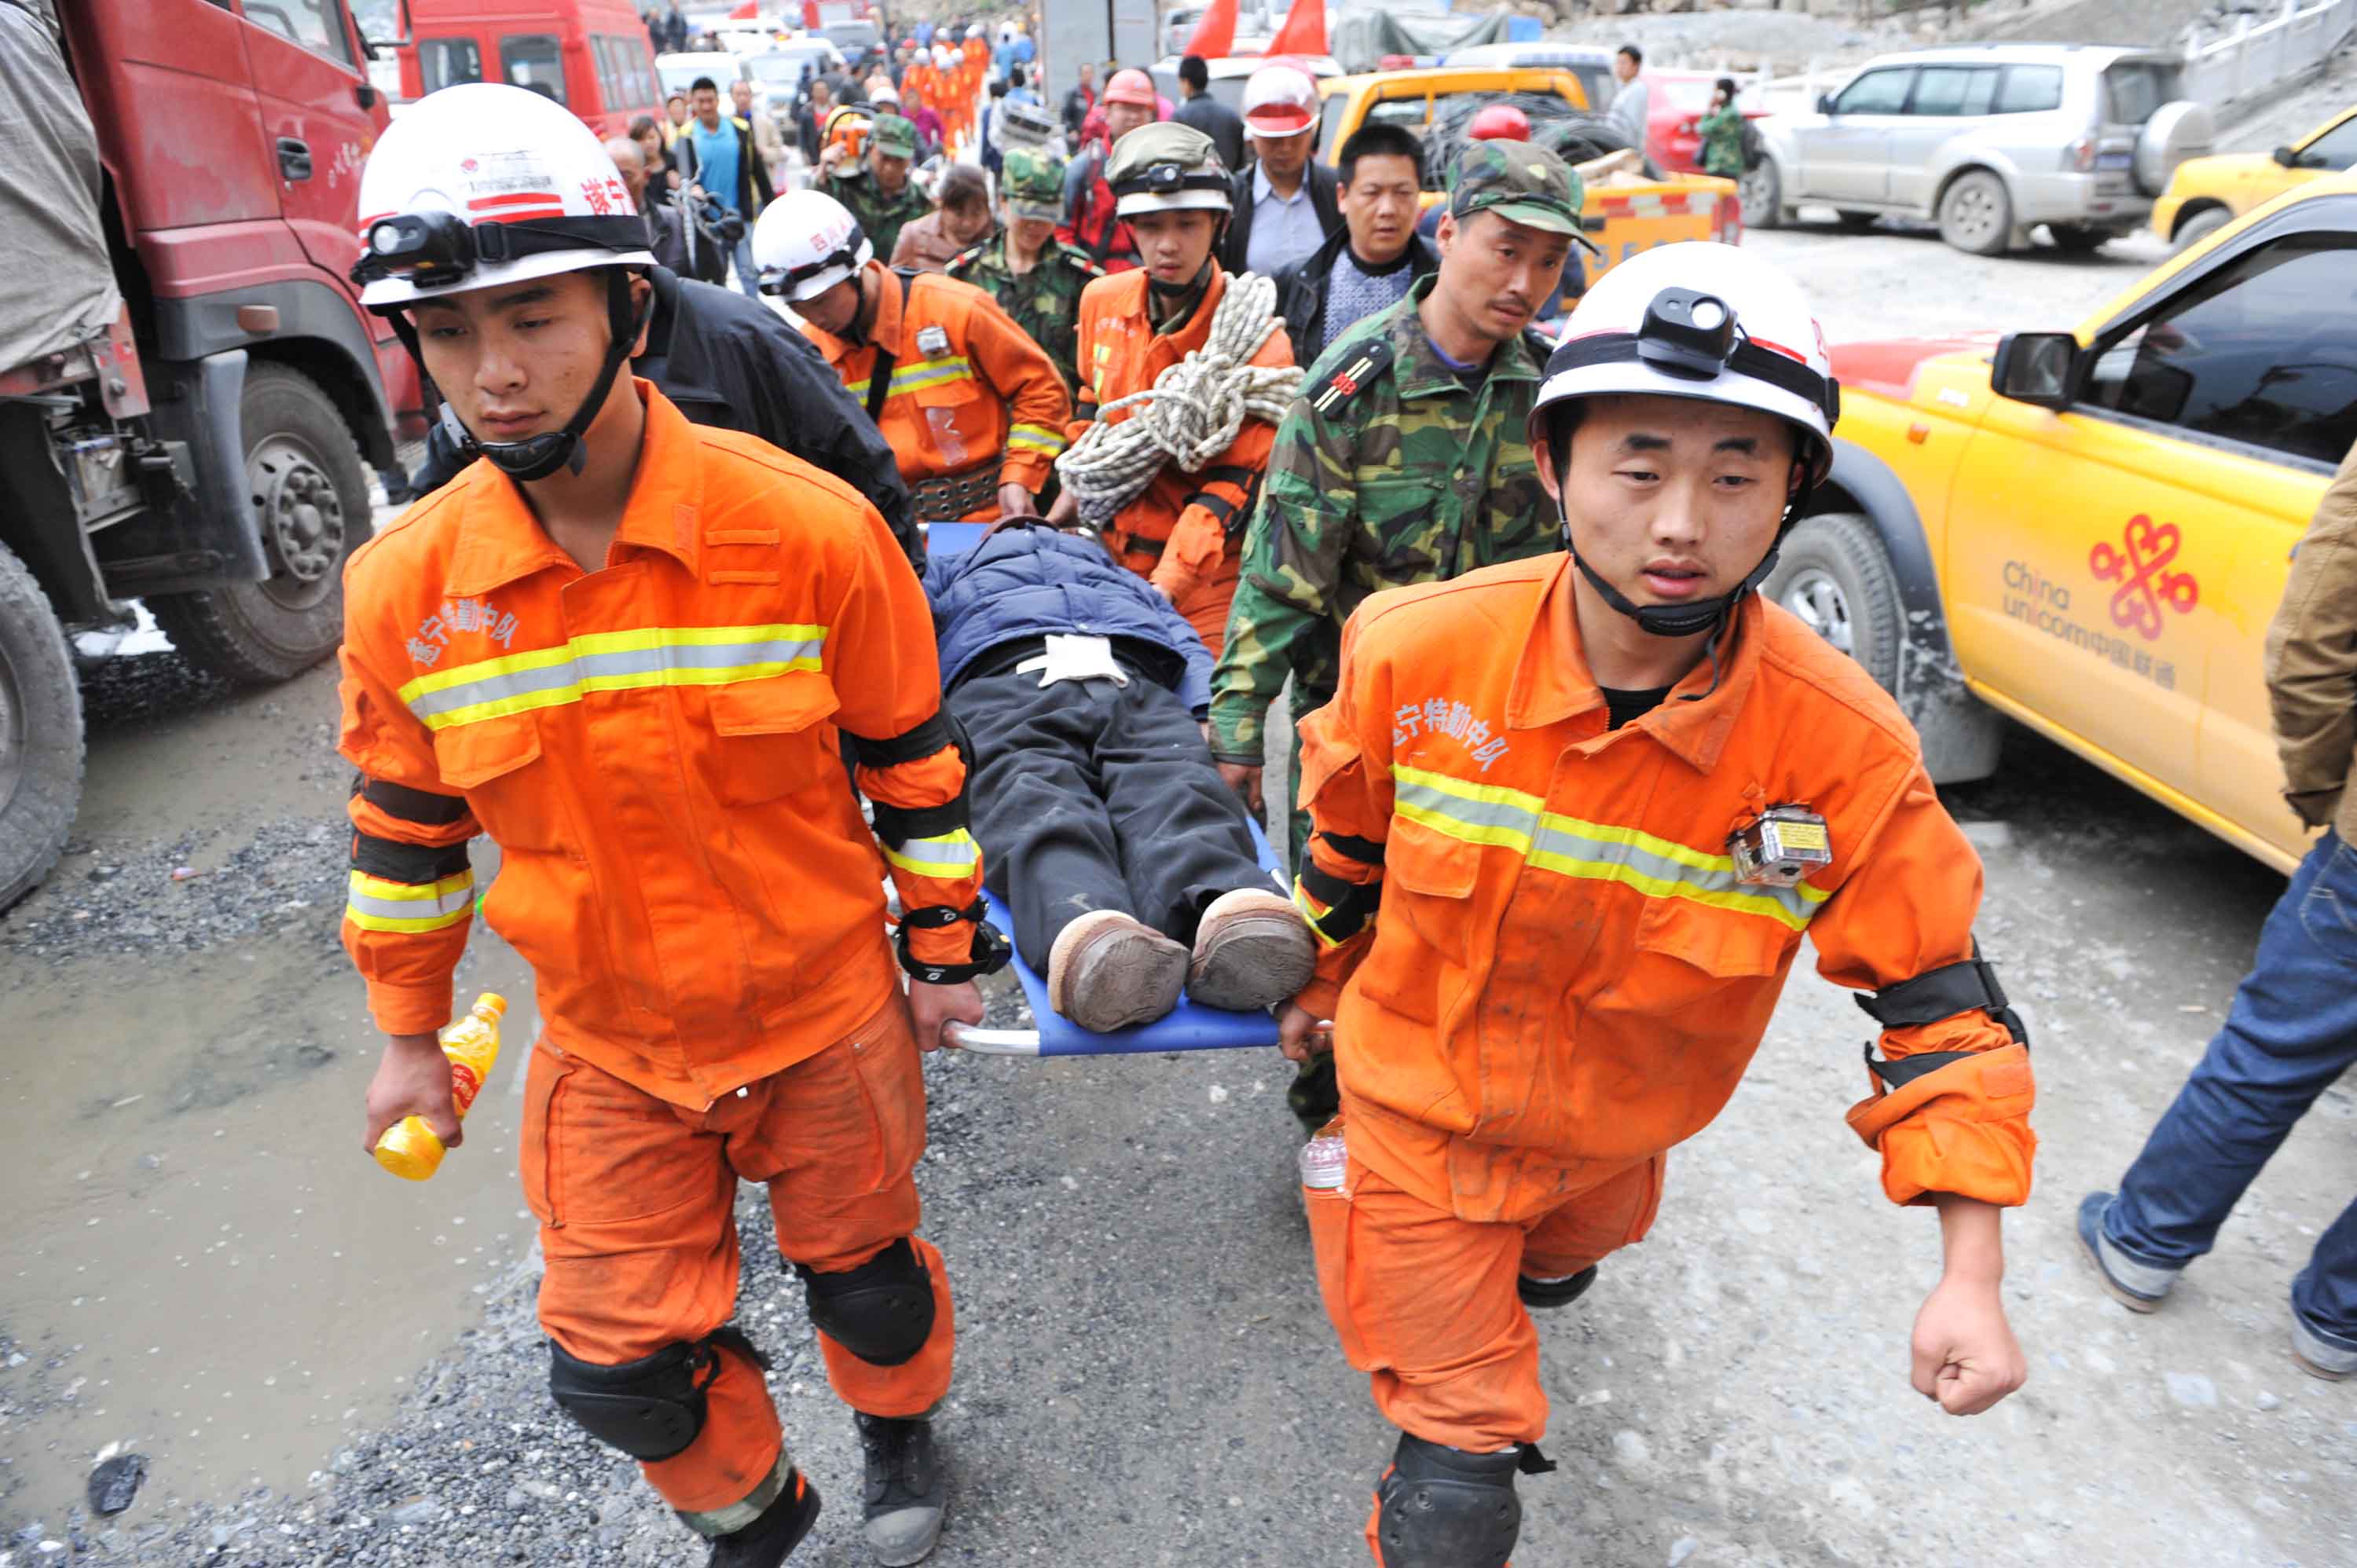 The quake-hit town of Muping, Baoxing County, where rescuers found an injured 78-year-old man five days after the quake struck. Photo: Xinhua